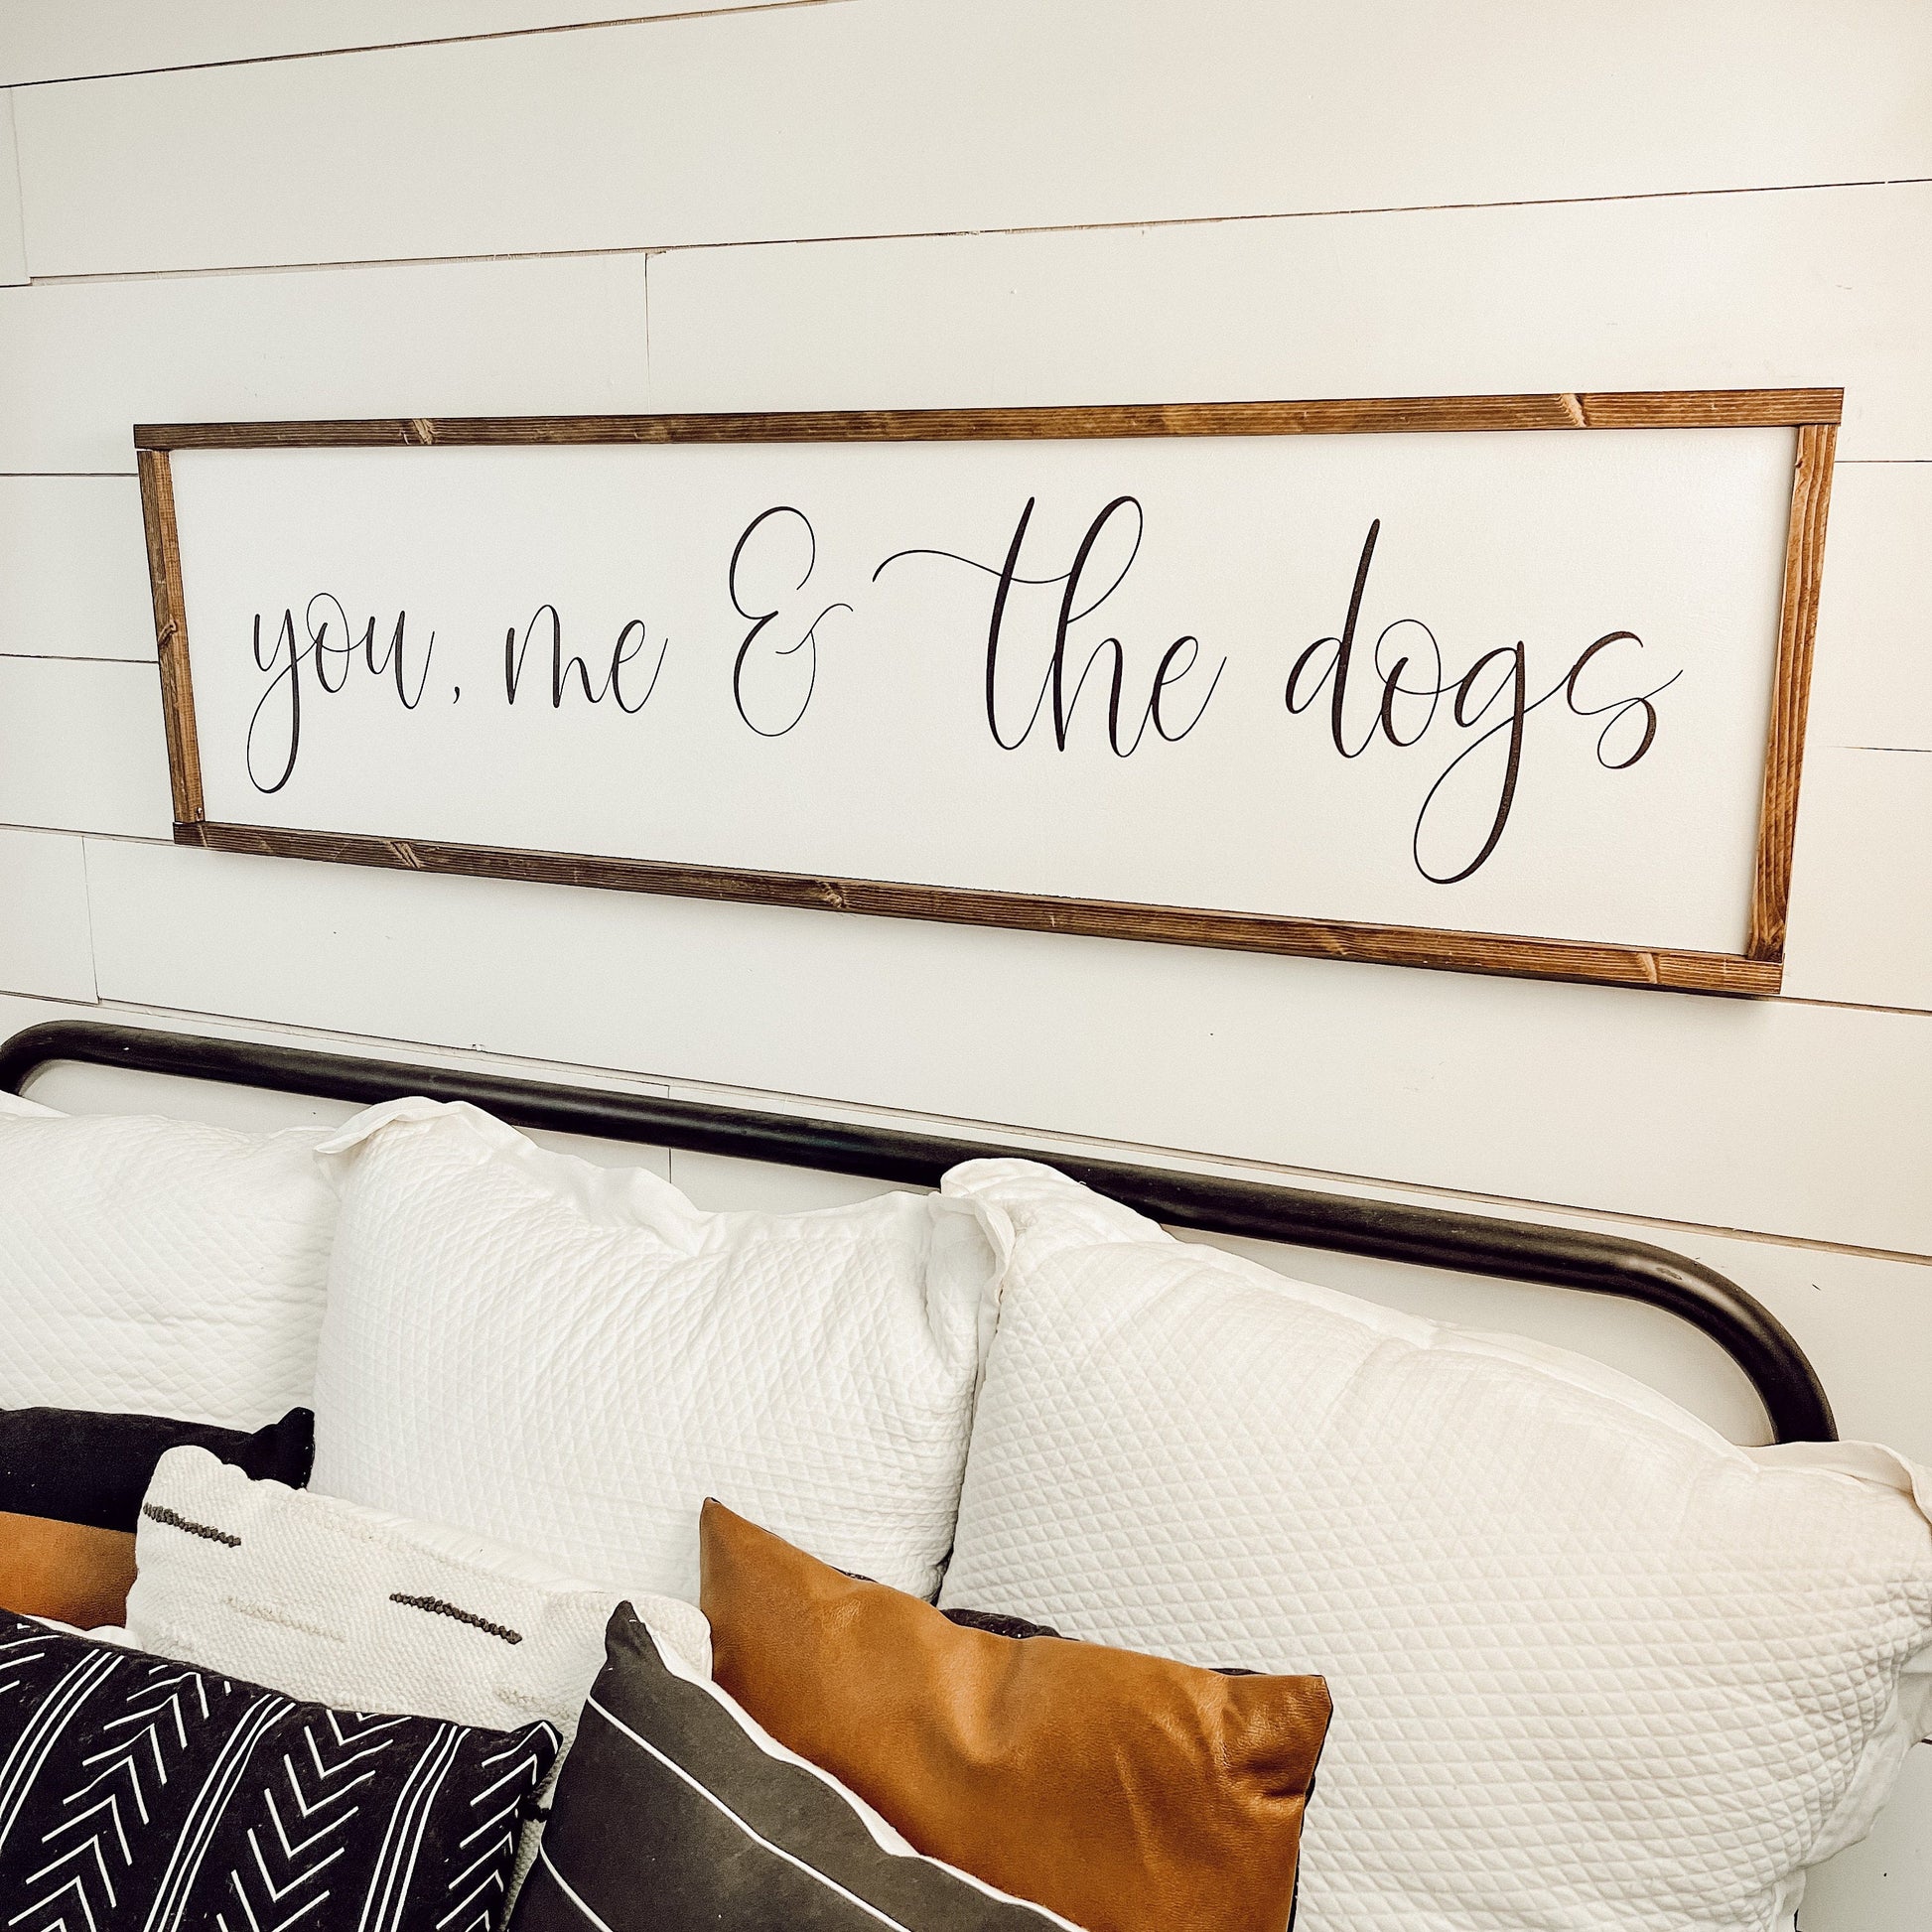 you, me & the dogs - above over the bed sign - master bedroom wall art [FREE SHIPPING!]